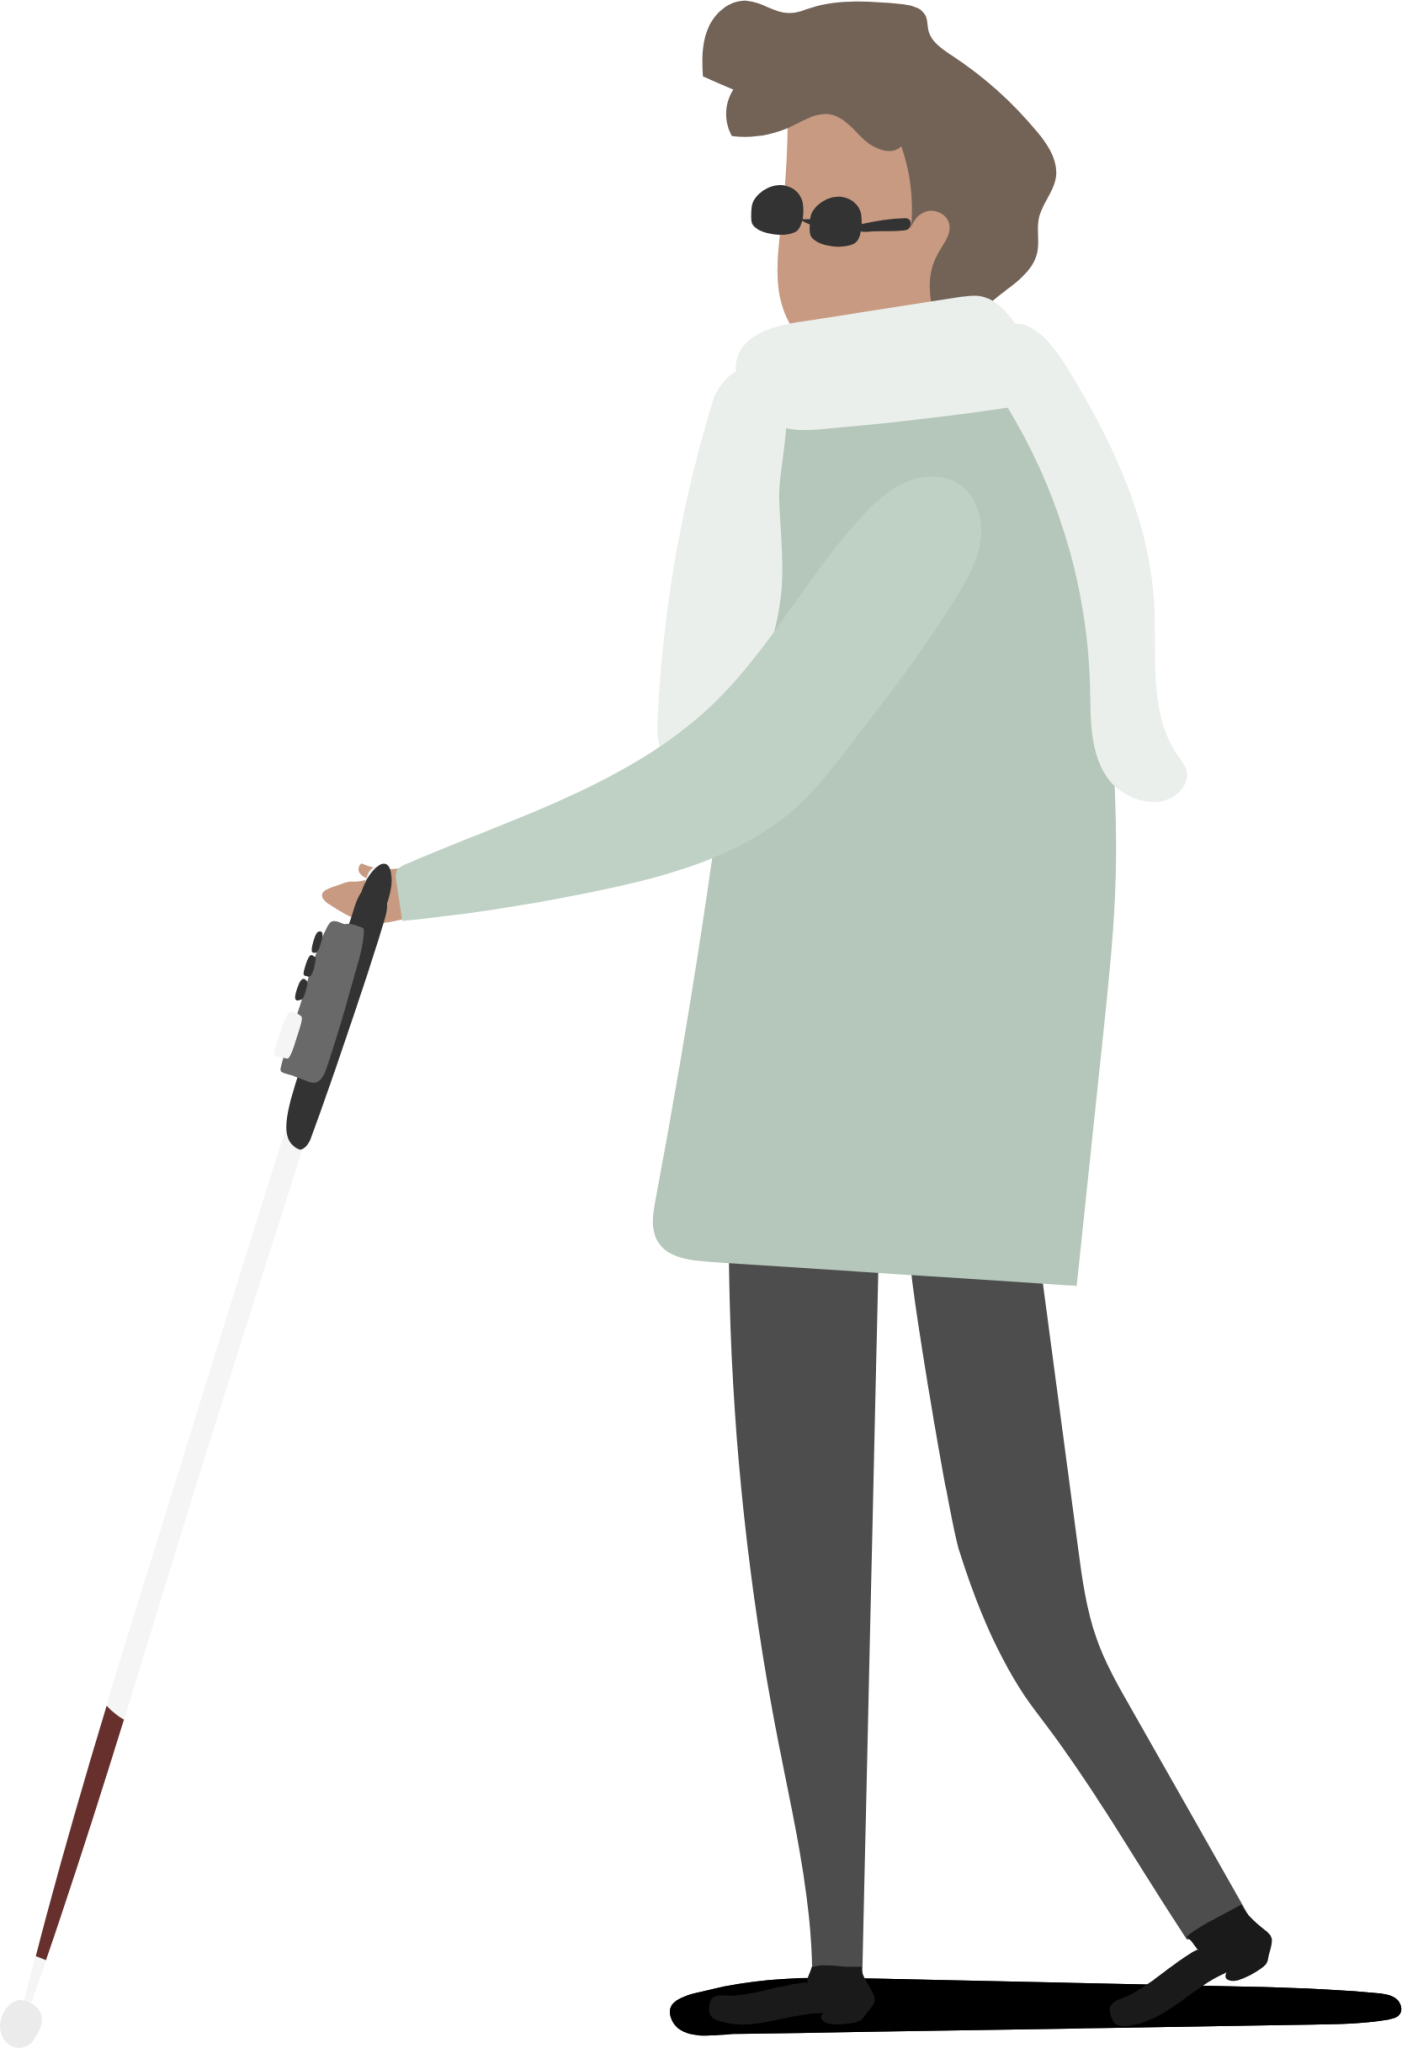 blind person walking scarf Illustration - Download for free – Iconduck